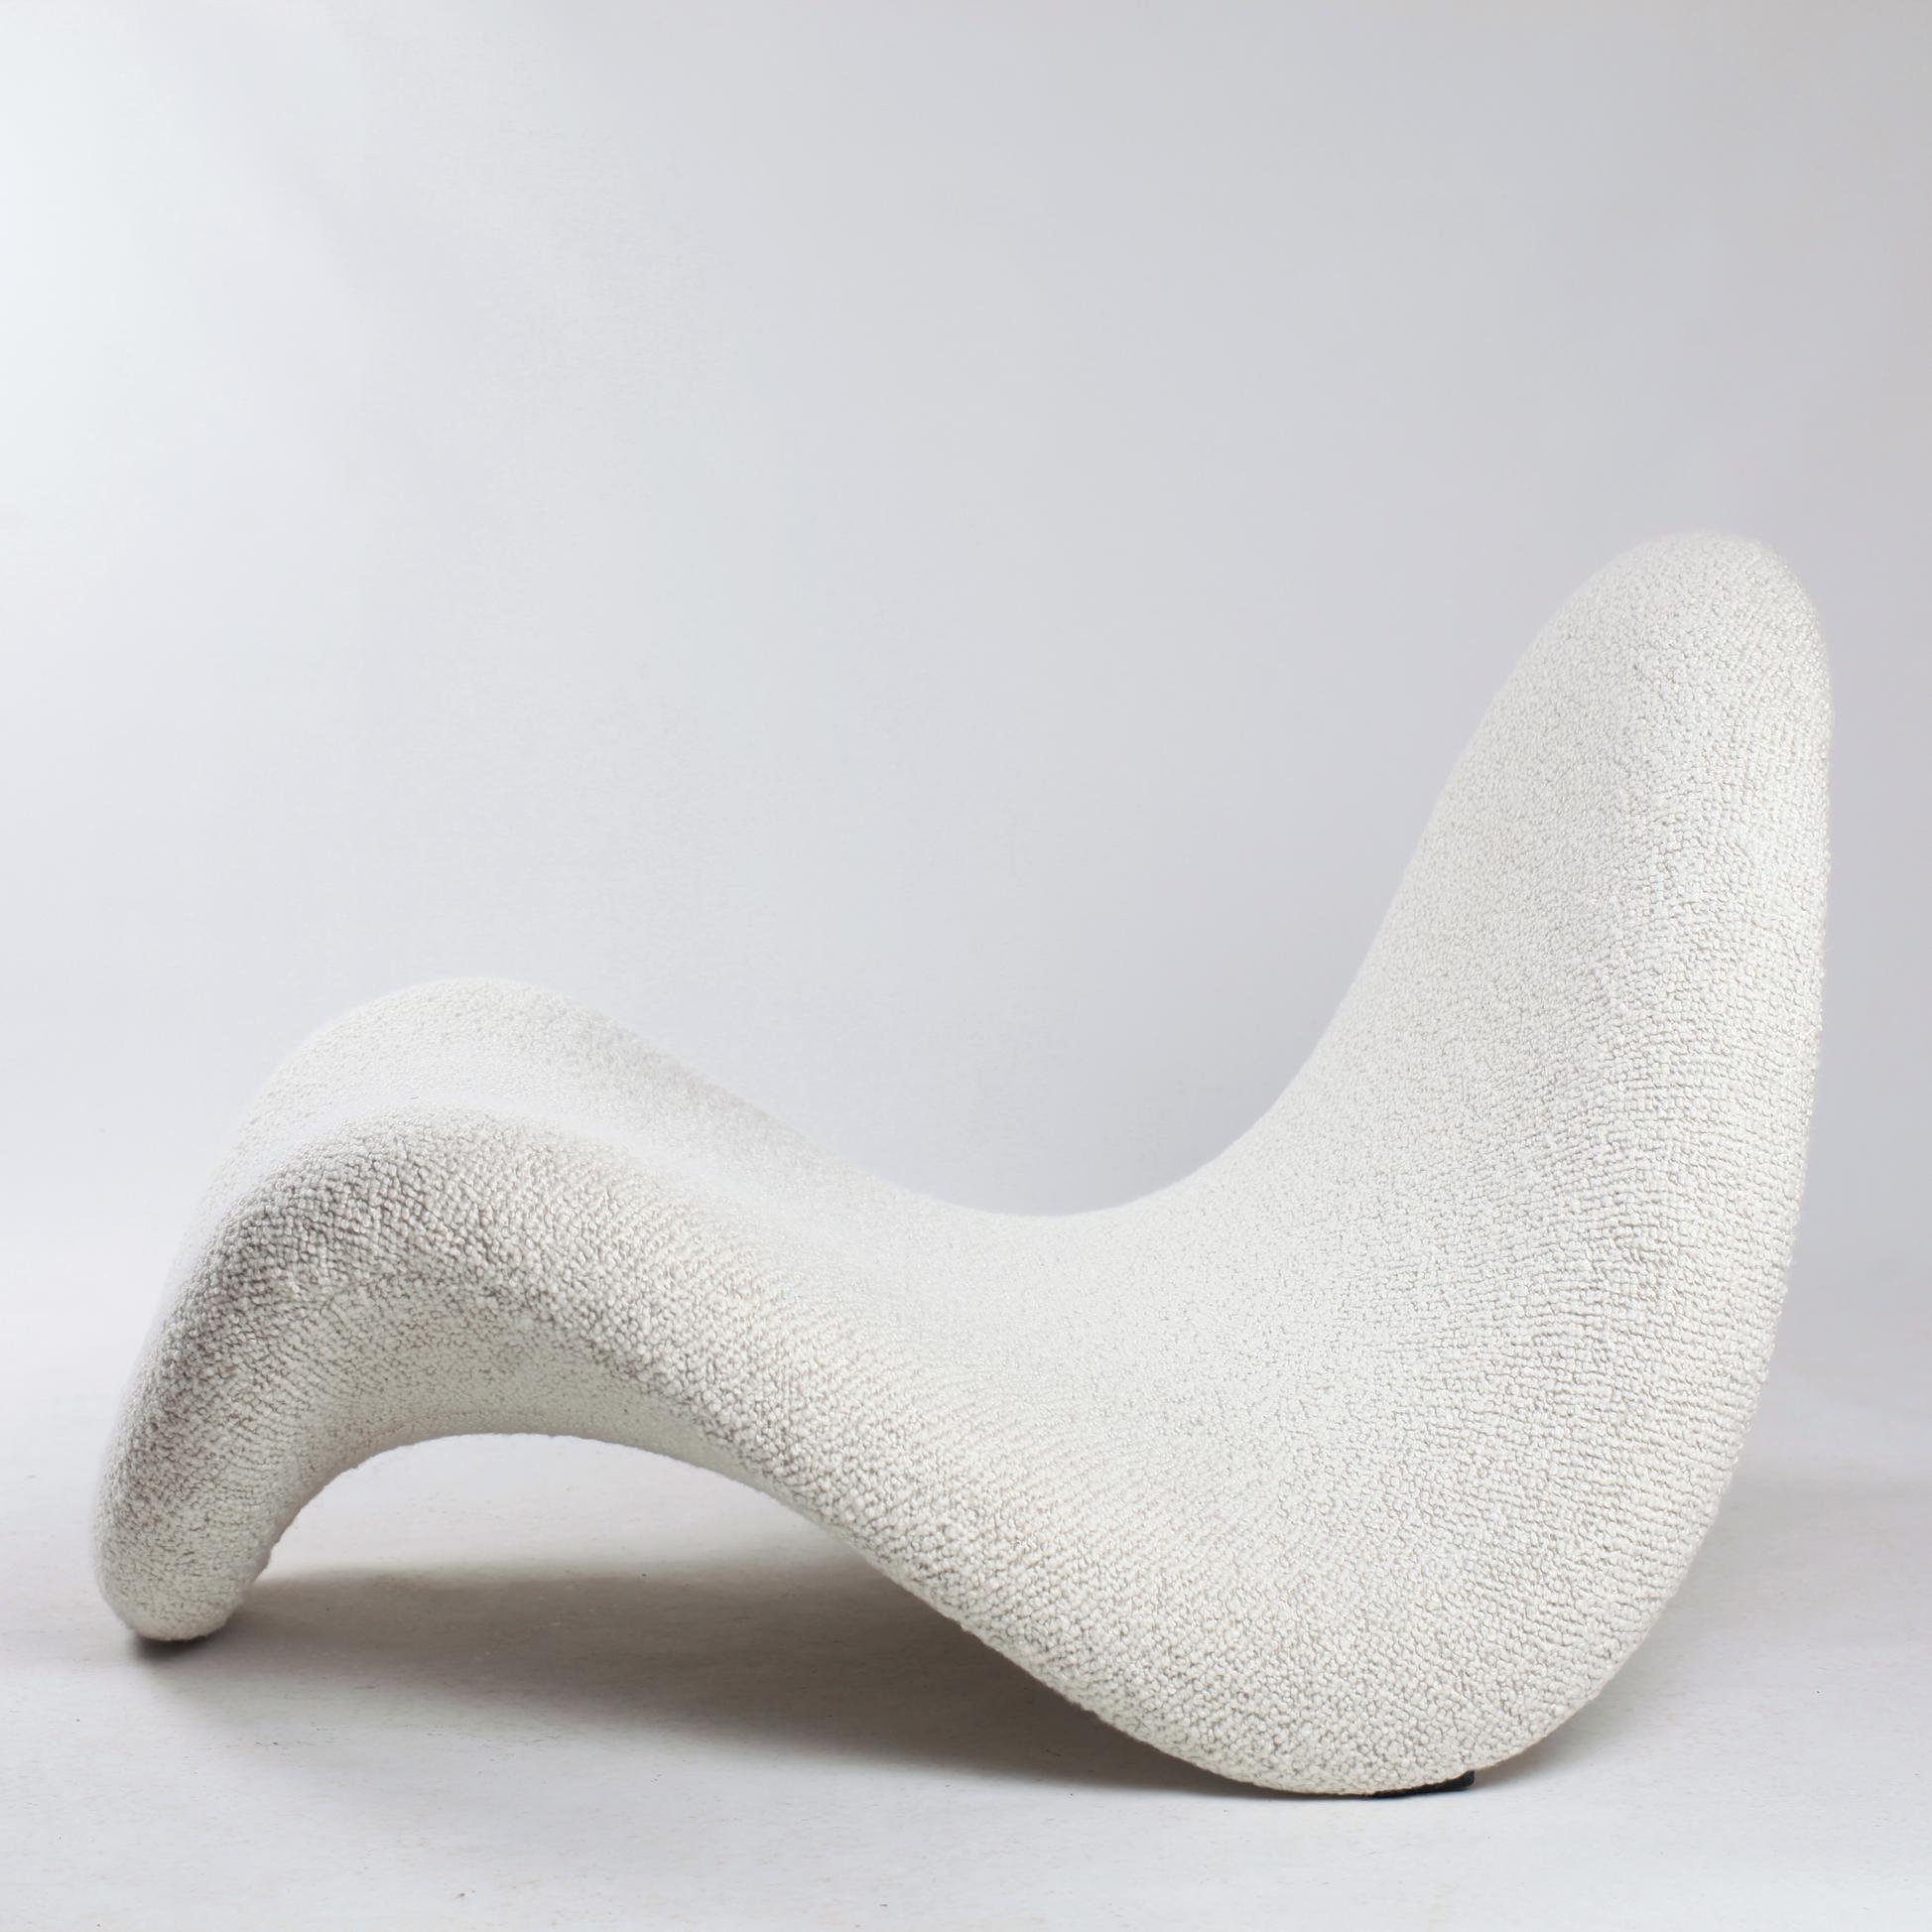 Iconic F577 tongue chair designed by Pierre Paulin for Artifort in the 1960s.
Early edition reupholstered in Pierre Frey Bouclette.